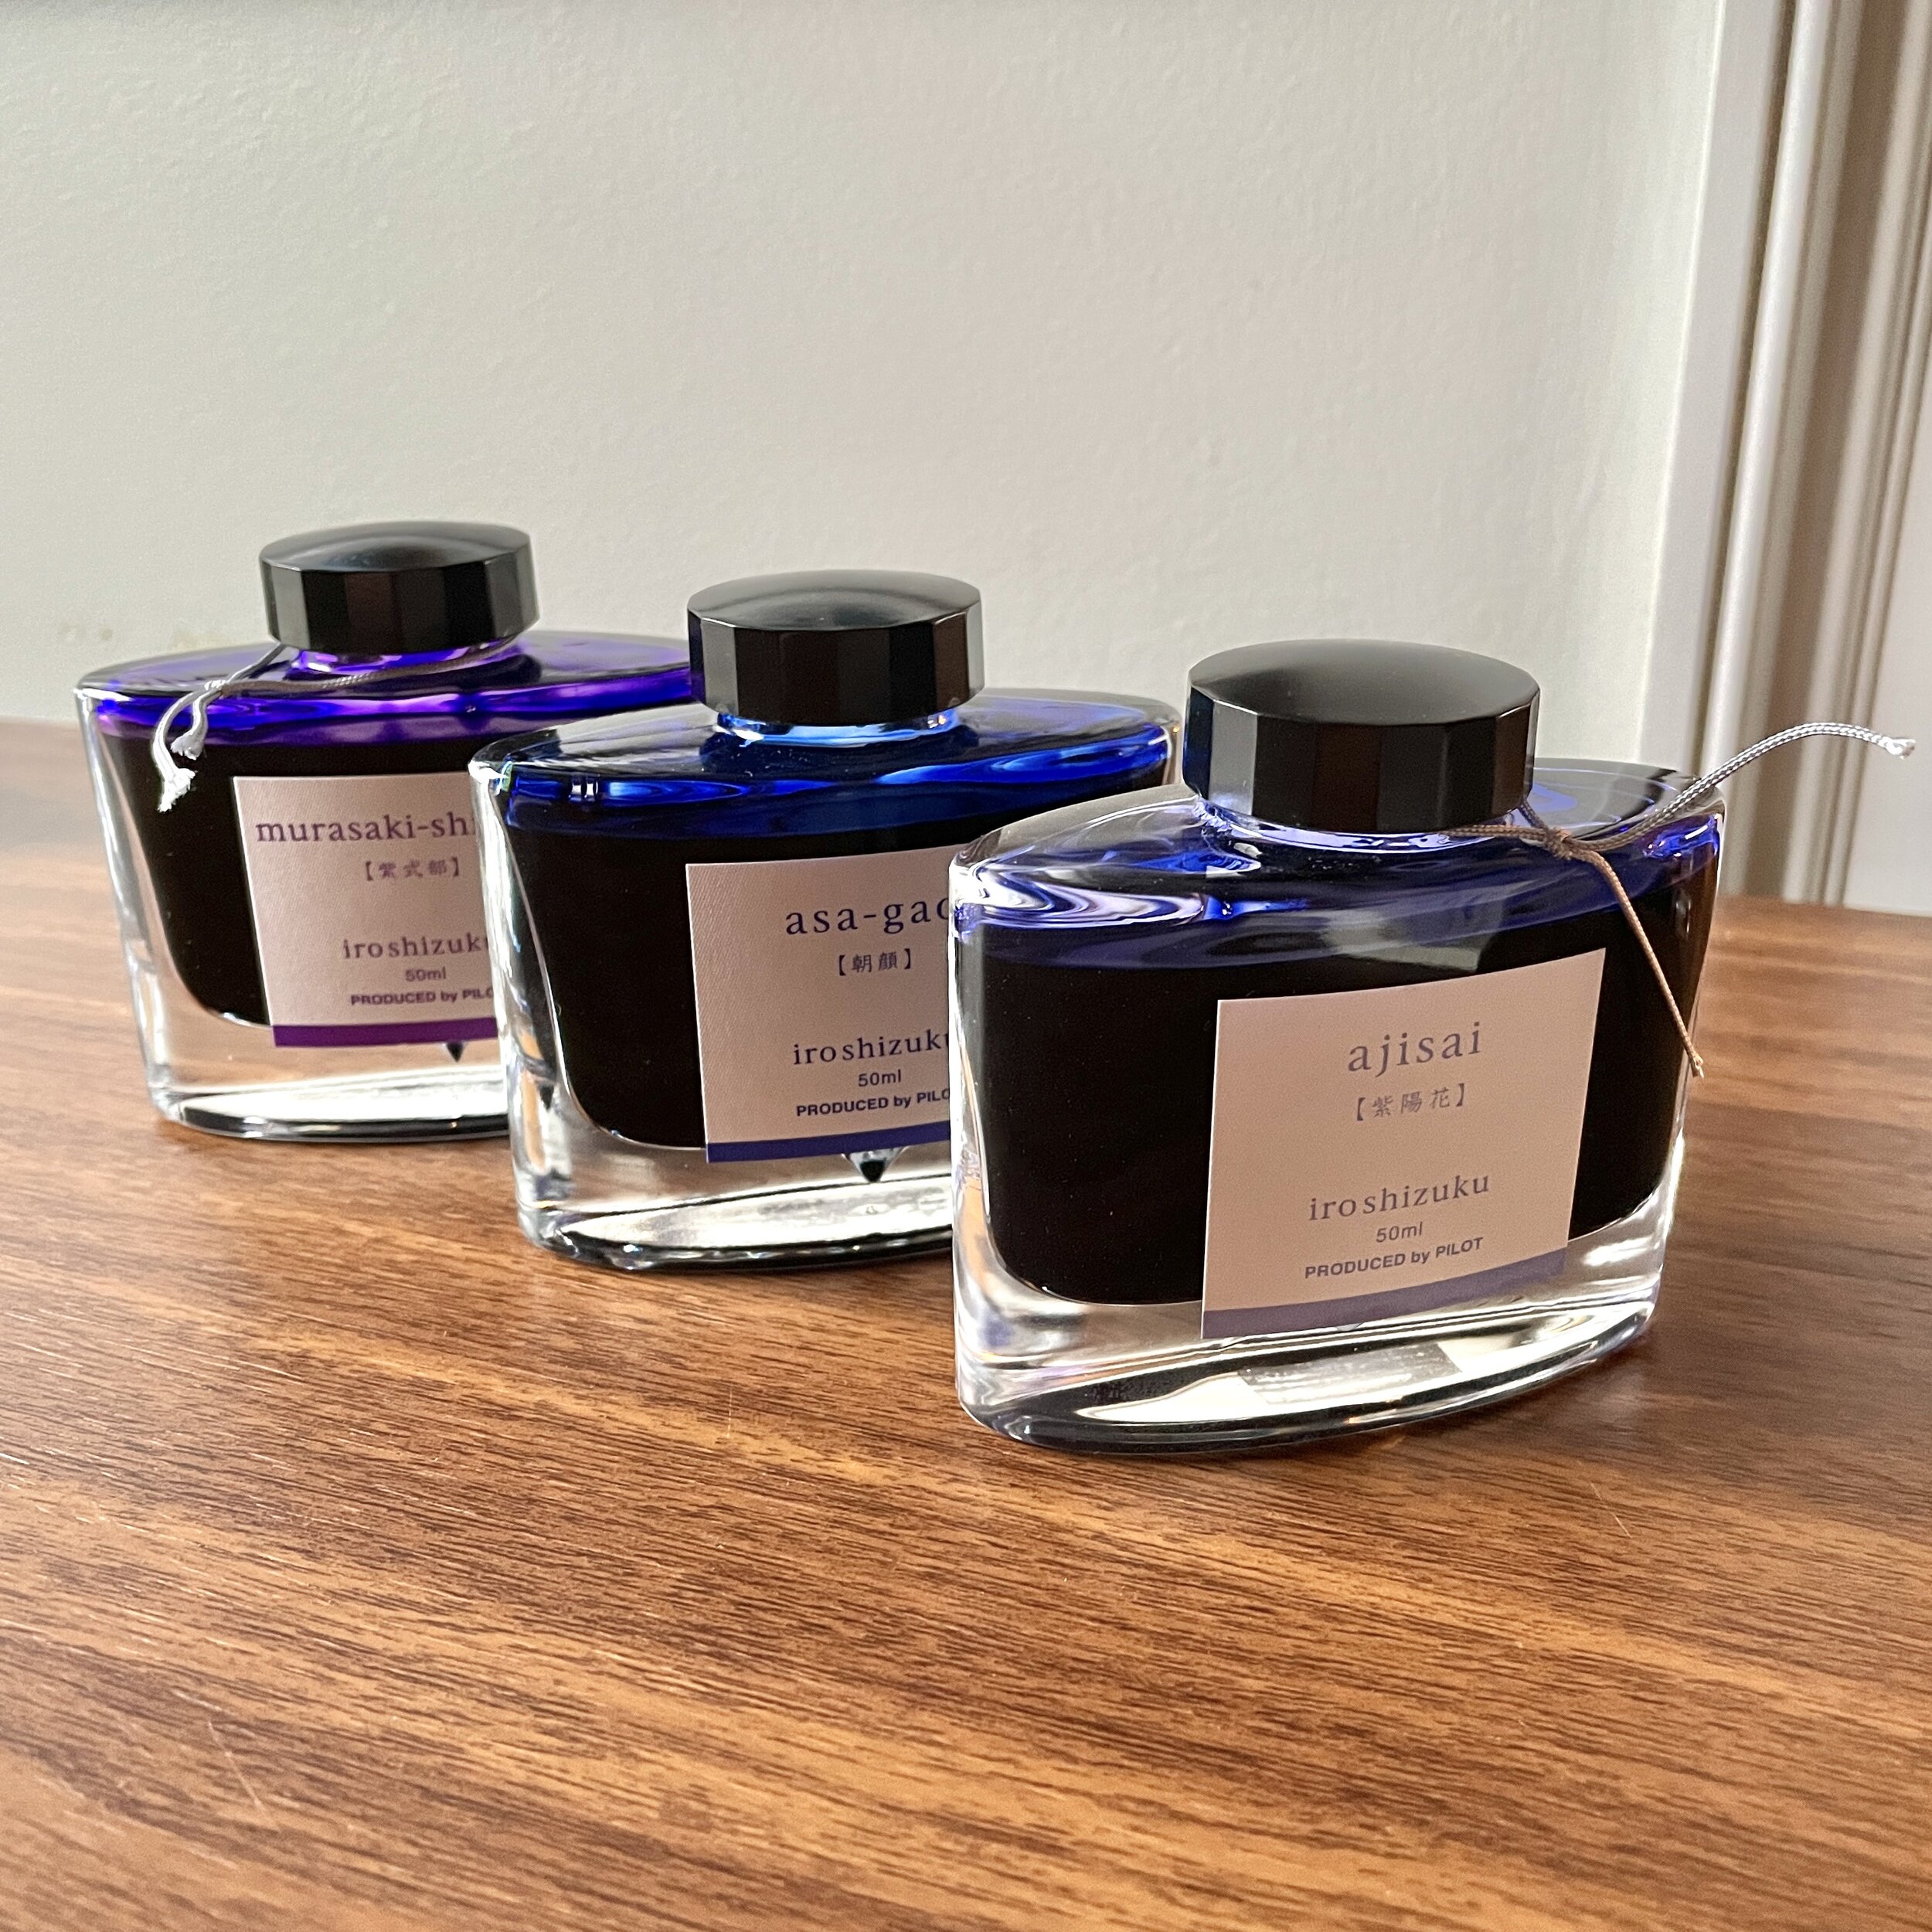 Workhorse Inks: Exploring Iroshizuku in Full (As in, the Entire Line) — The  Gentleman Stationer